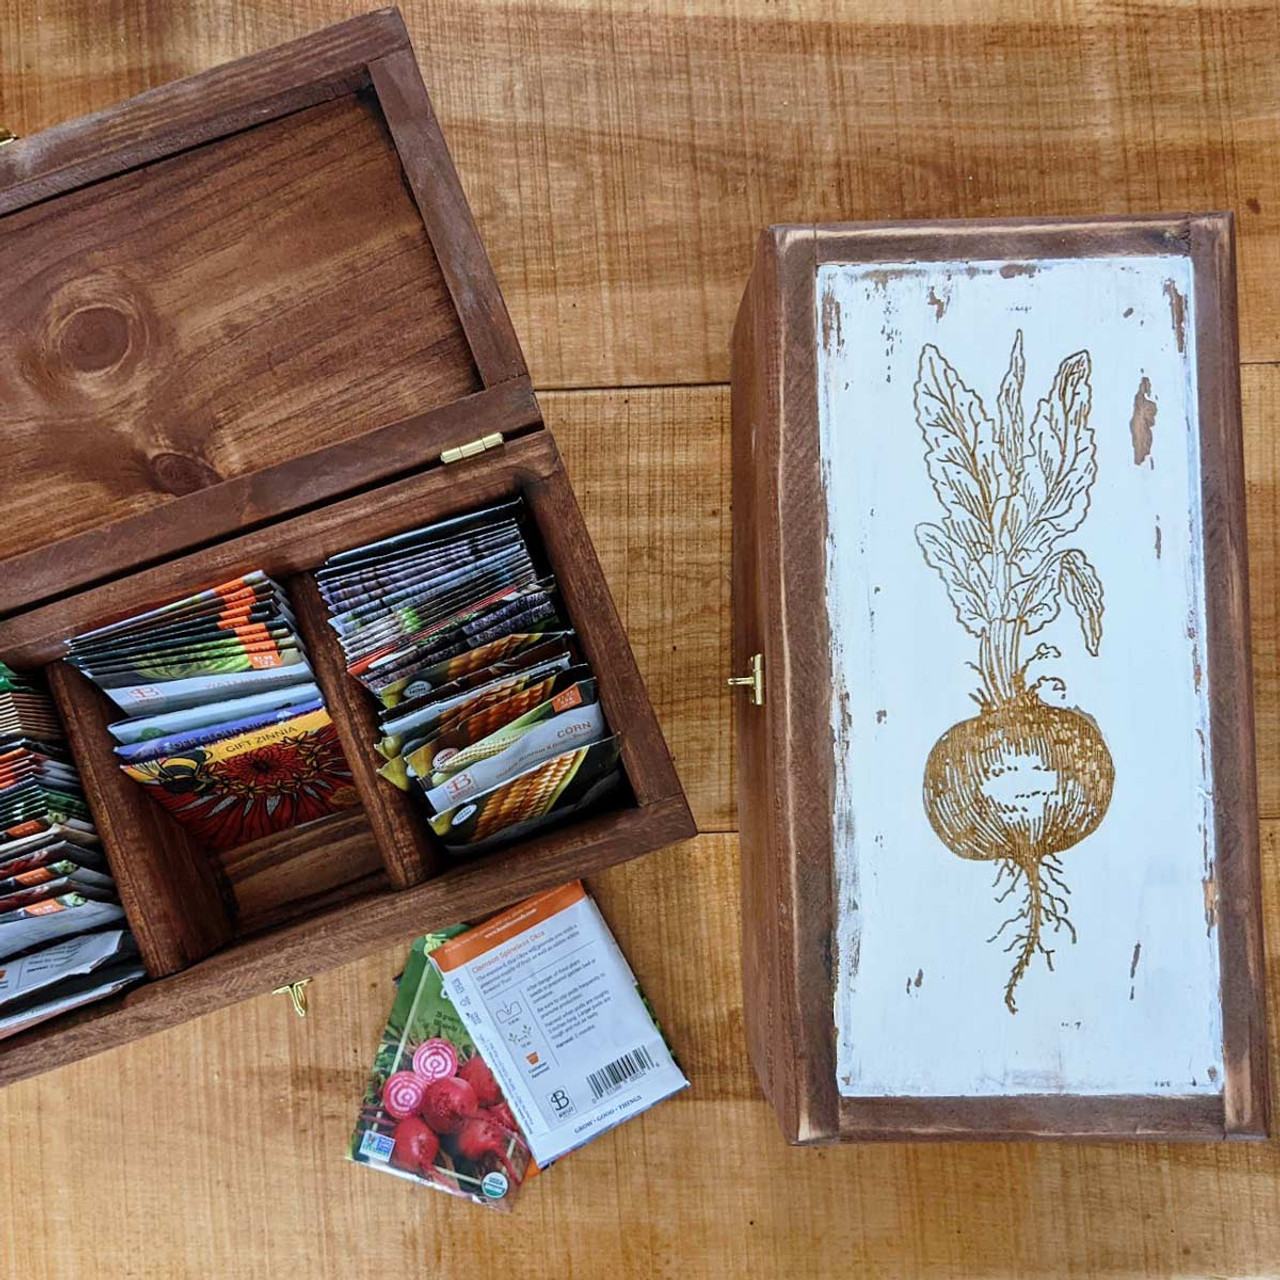 Wooden Seed Packet Organizer with Recycled Paper Dividers - Seed Storage